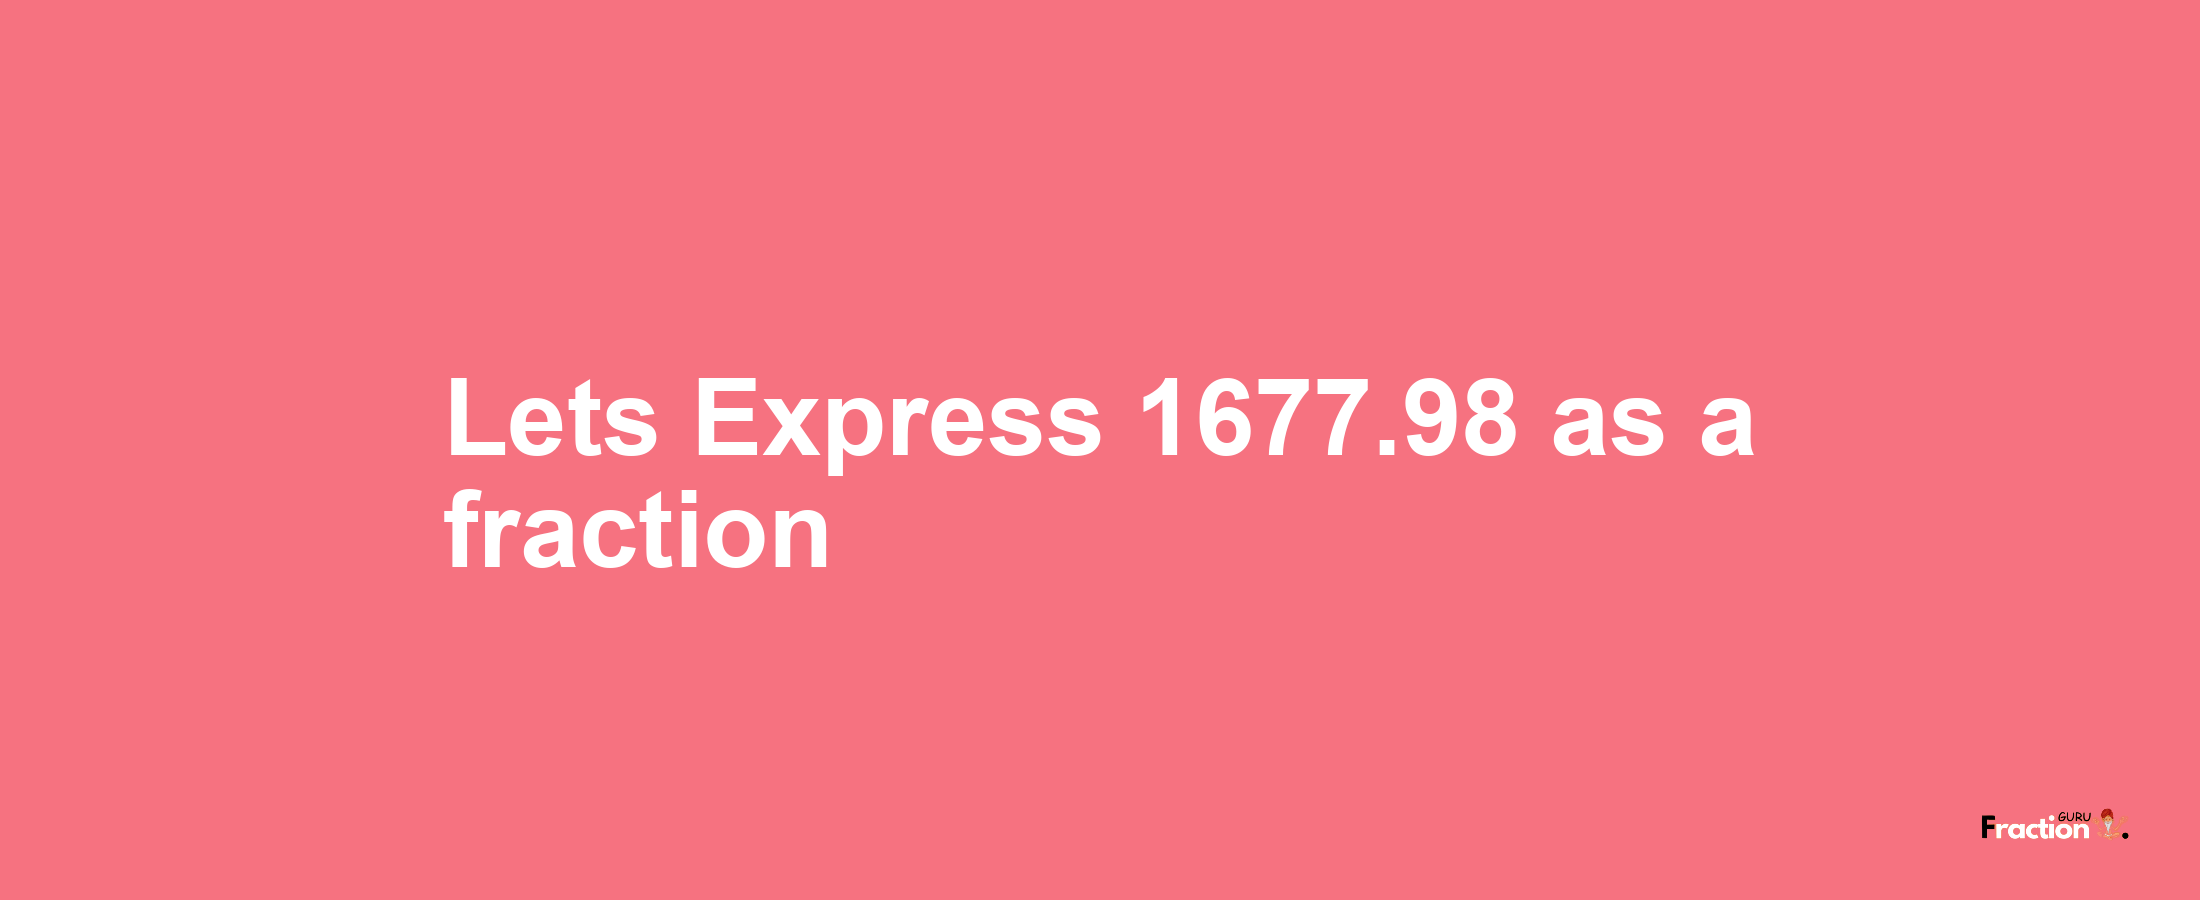 Lets Express 1677.98 as afraction